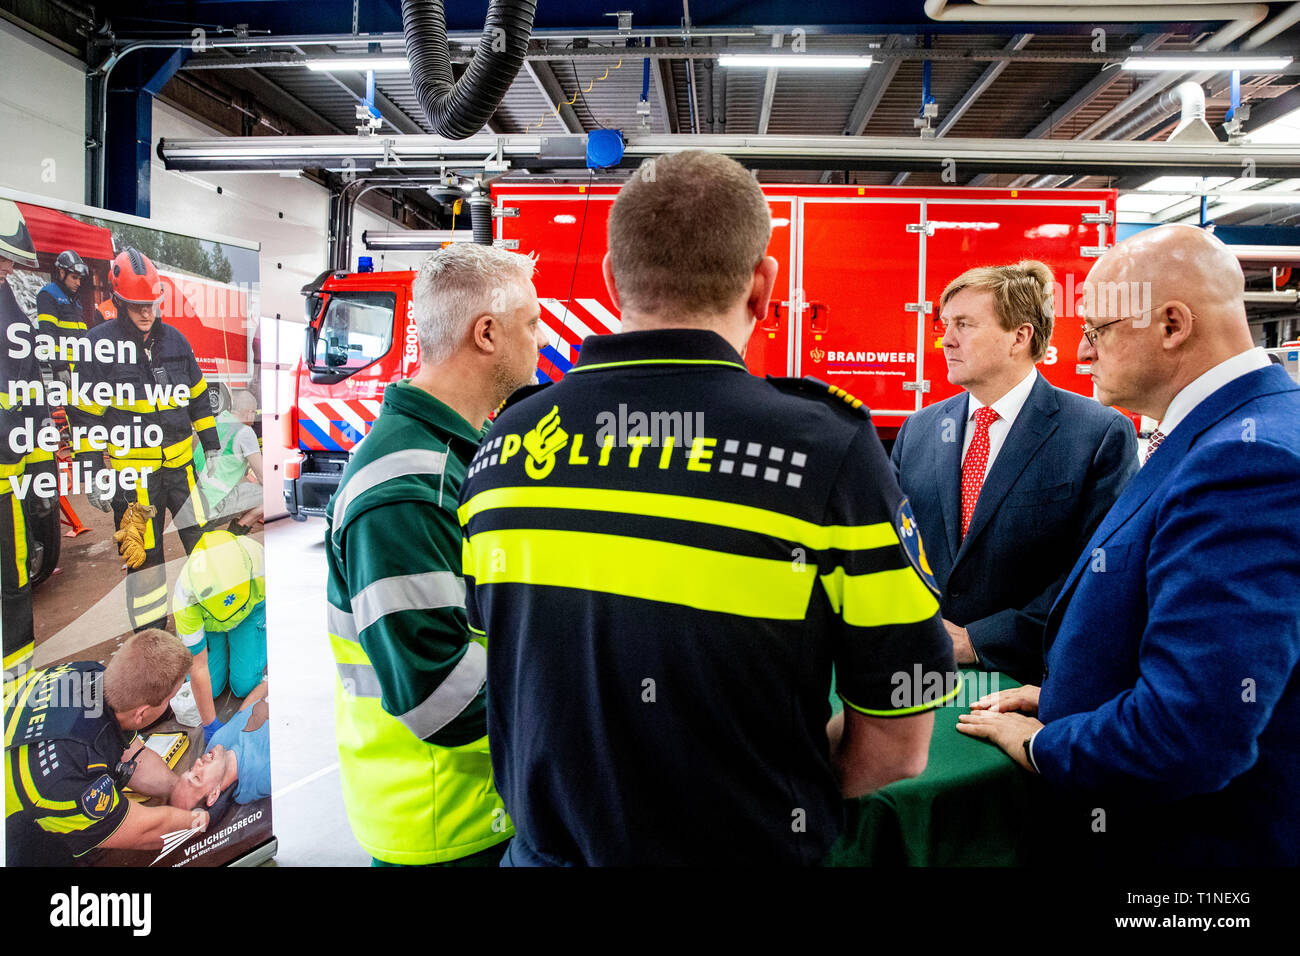 King Willem-Alexander visit the safety region Midden-West Brabant with Justice minister Ferdinand Grapperhaus in Tilburg, The Netherlands, 26 March 20 Stock Photo